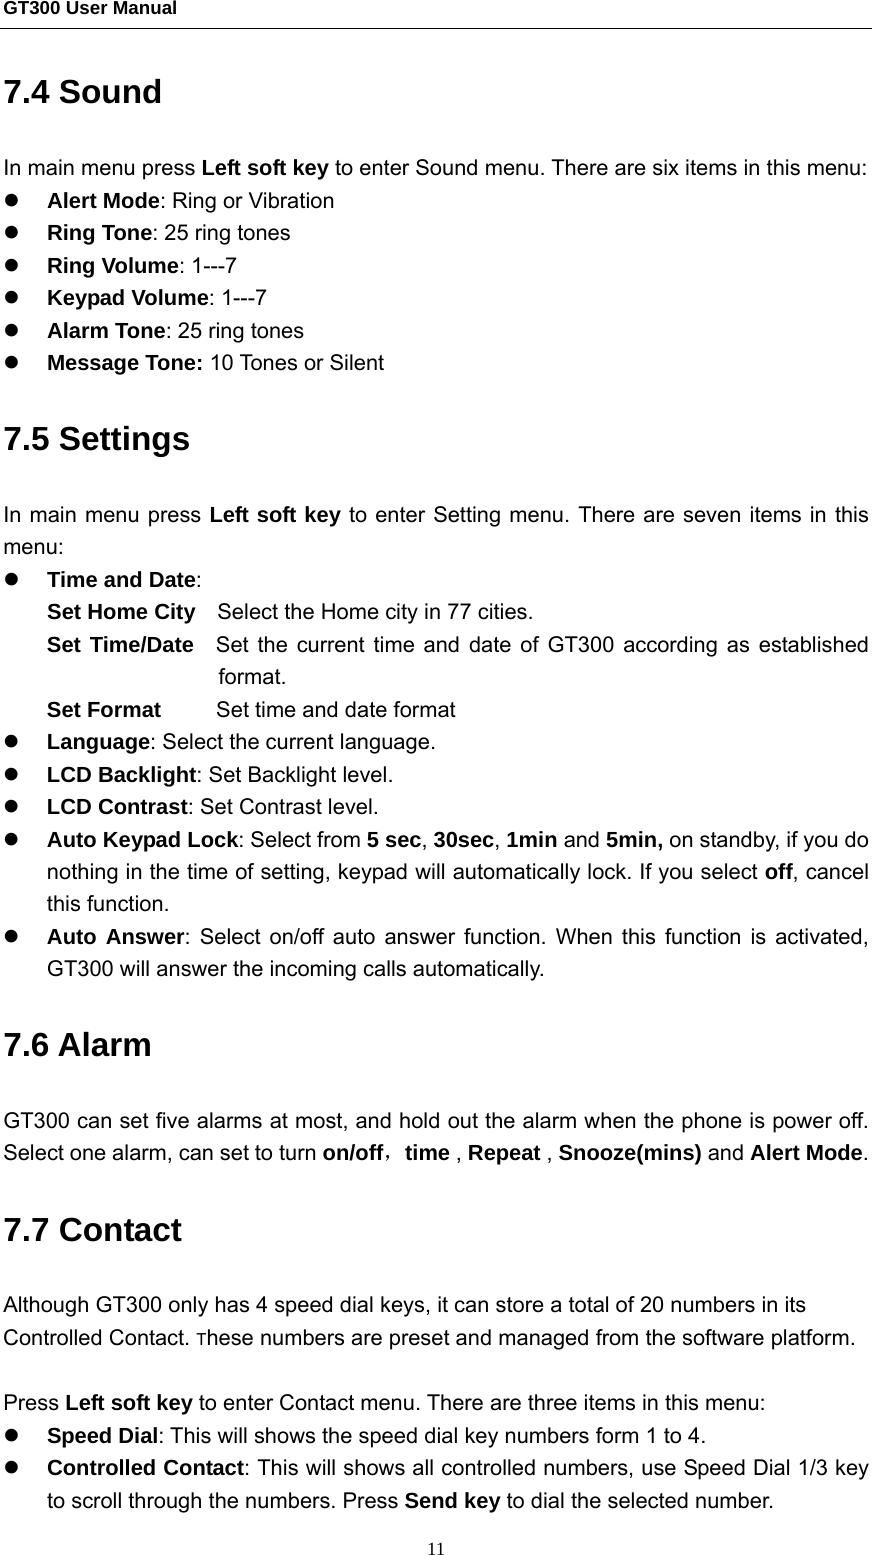 GT300 User Manual                                                  11 7.4 Sound In main menu press Left soft key to enter Sound menu. There are six items in this menu: z Alert Mode: Ring or Vibration z Ring Tone: 25 ring tones   z Ring Volume: 1---7 z Keypad Volume: 1---7 z Alarm Tone: 25 ring tones   z Message Tone: 10 Tones or Silent 7.5 Settings   In main menu press Left soft key to enter Setting menu. There are seven items in this menu: z Time and Date: Set Home City    Select the Home city in 77 cities. Set Time/Date  Set the current time and date of GT300 according as established format. Set Format     Set time and date format z Language: Select the current language. z LCD Backlight: Set Backlight level. z LCD Contrast: Set Contrast level. z Auto Keypad Lock: Select from 5 sec, 30sec, 1min and 5min, on standby, if you do nothing in the time of setting, keypad will automatically lock. If you select off, cancel this function. z Auto Answer: Select on/off auto answer function. When this function is activated, GT300 will answer the incoming calls automatically. 7.6 Alarm GT300 can set five alarms at most, and hold out the alarm when the phone is power off. Select one alarm, can set to turn on/off，time , Repeat , Snooze(mins) and Alert Mode. 7.7 Contact Although GT300 only has 4 speed dial keys, it can store a total of 20 numbers in its Controlled Contact. These numbers are preset and managed from the software platform.    Press Left soft key to enter Contact menu. There are three items in this menu: z Speed Dial: This will shows the speed dial key numbers form 1 to 4. z Controlled Contact: This will shows all controlled numbers, use Speed Dial 1/3 key to scroll through the numbers. Press Send key to dial the selected number. 